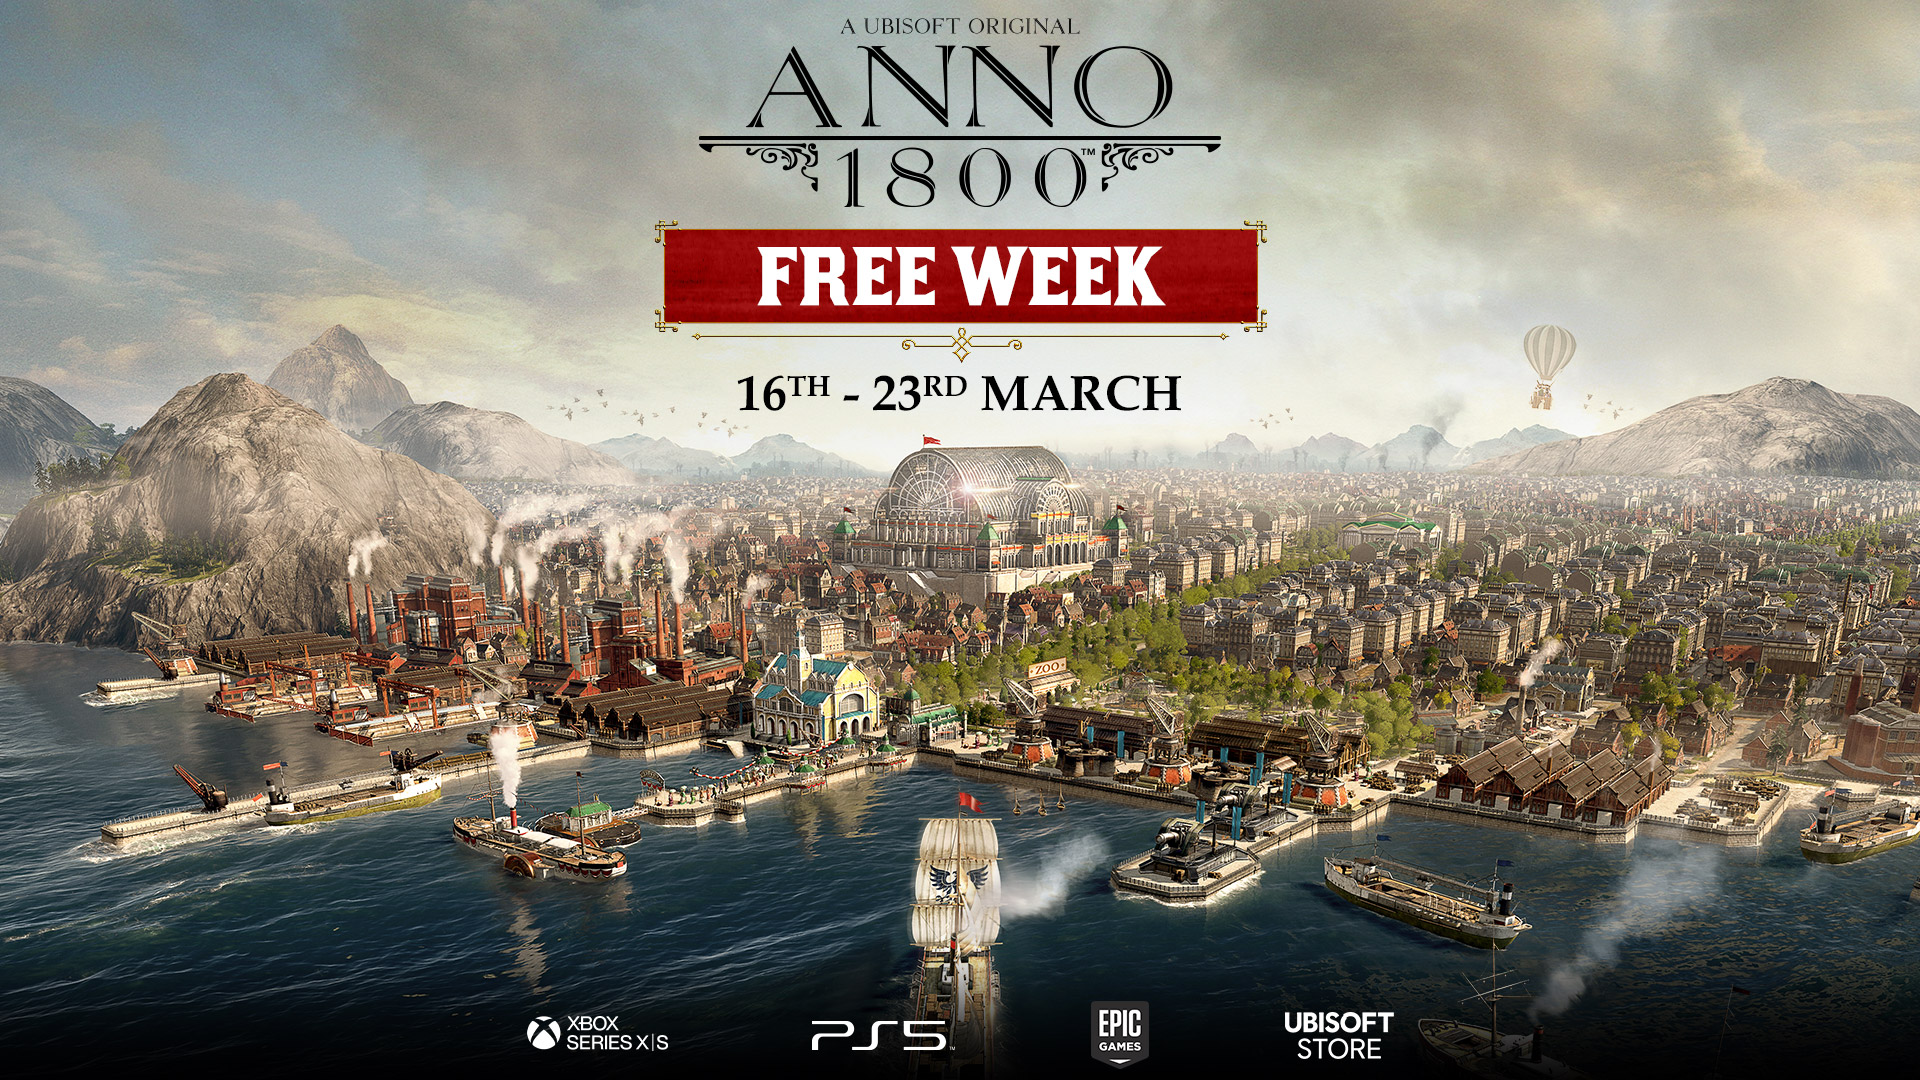 Play Anno 1800 For Free On PC and Consoles from March 16 to March 23